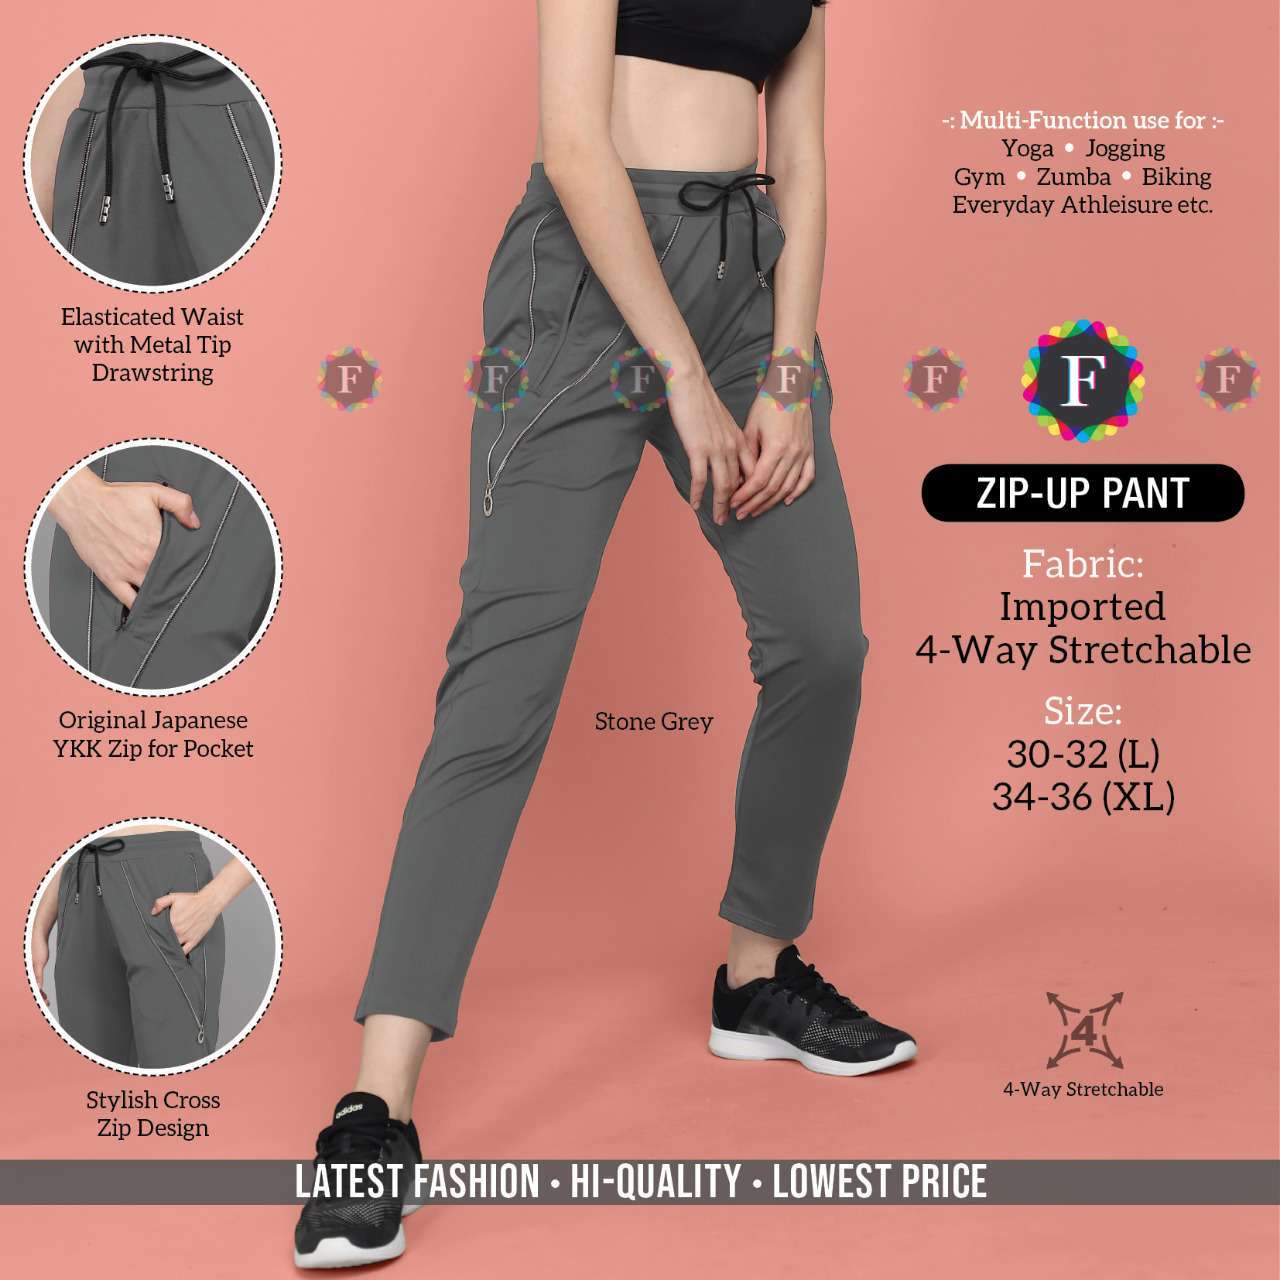 zip up pant multi function yoga jogging gym zumba pant collection